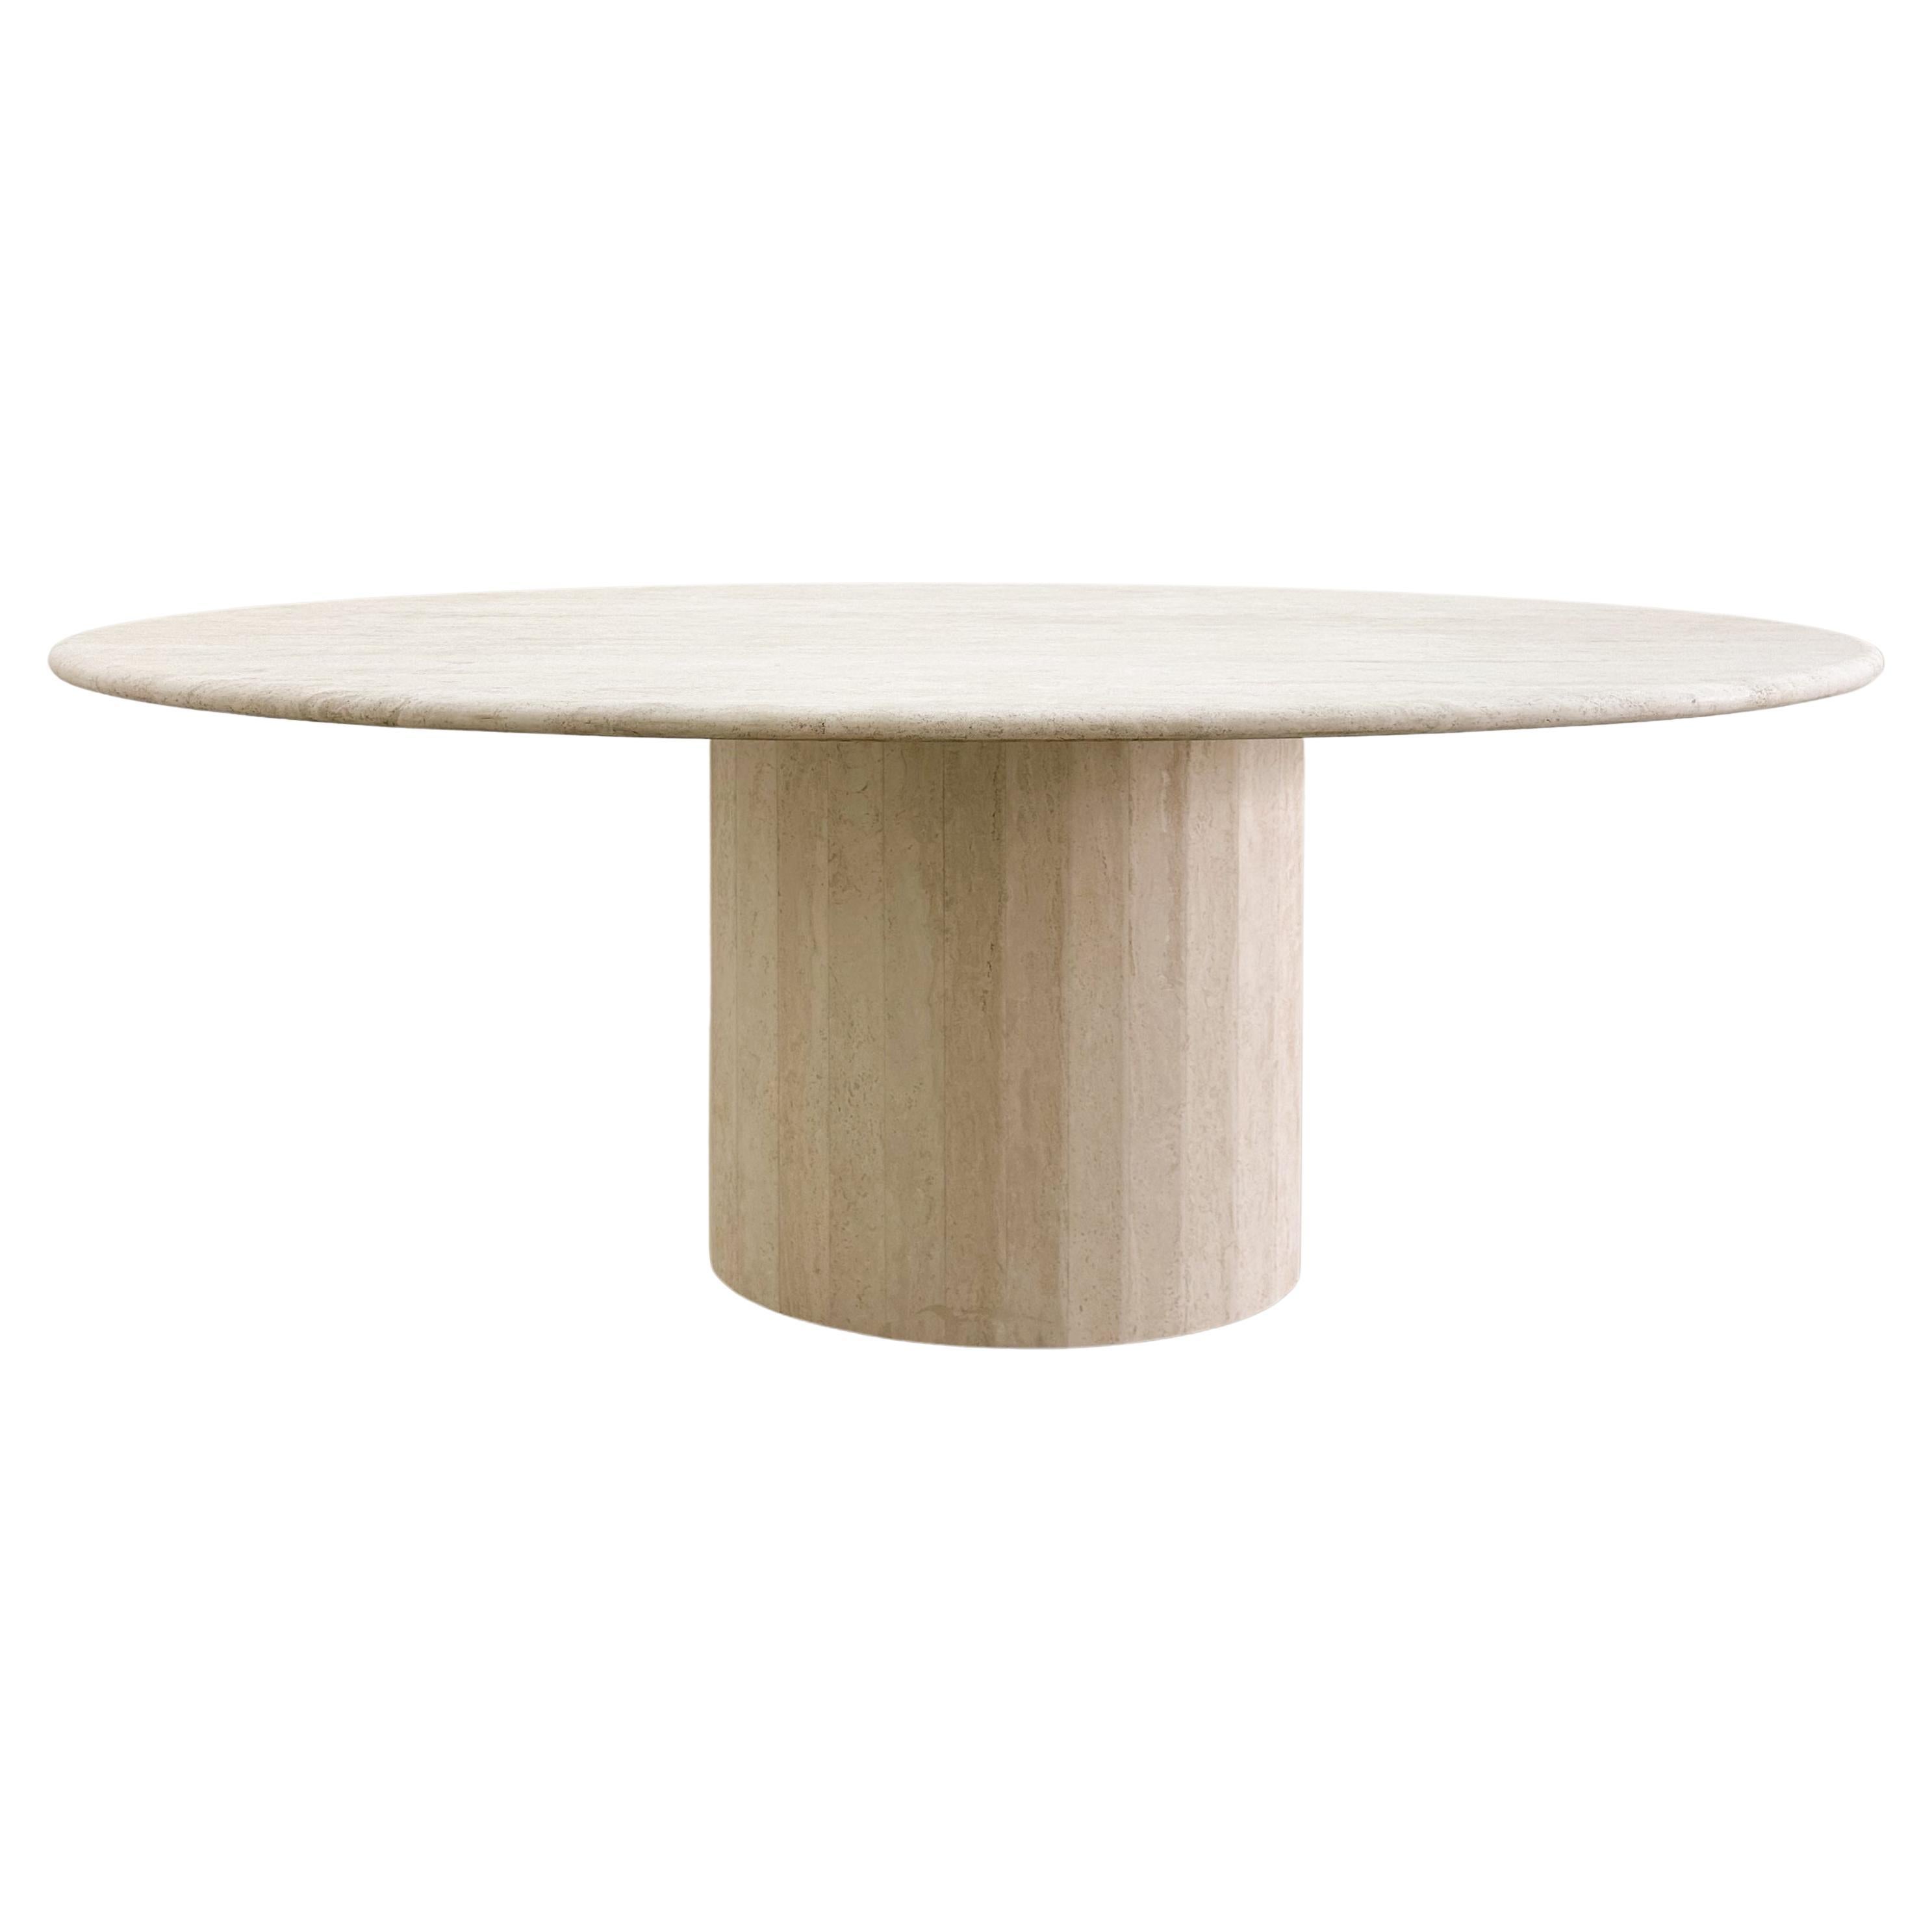 Vintage Travertine Stone Oval Dining Table  For Sale